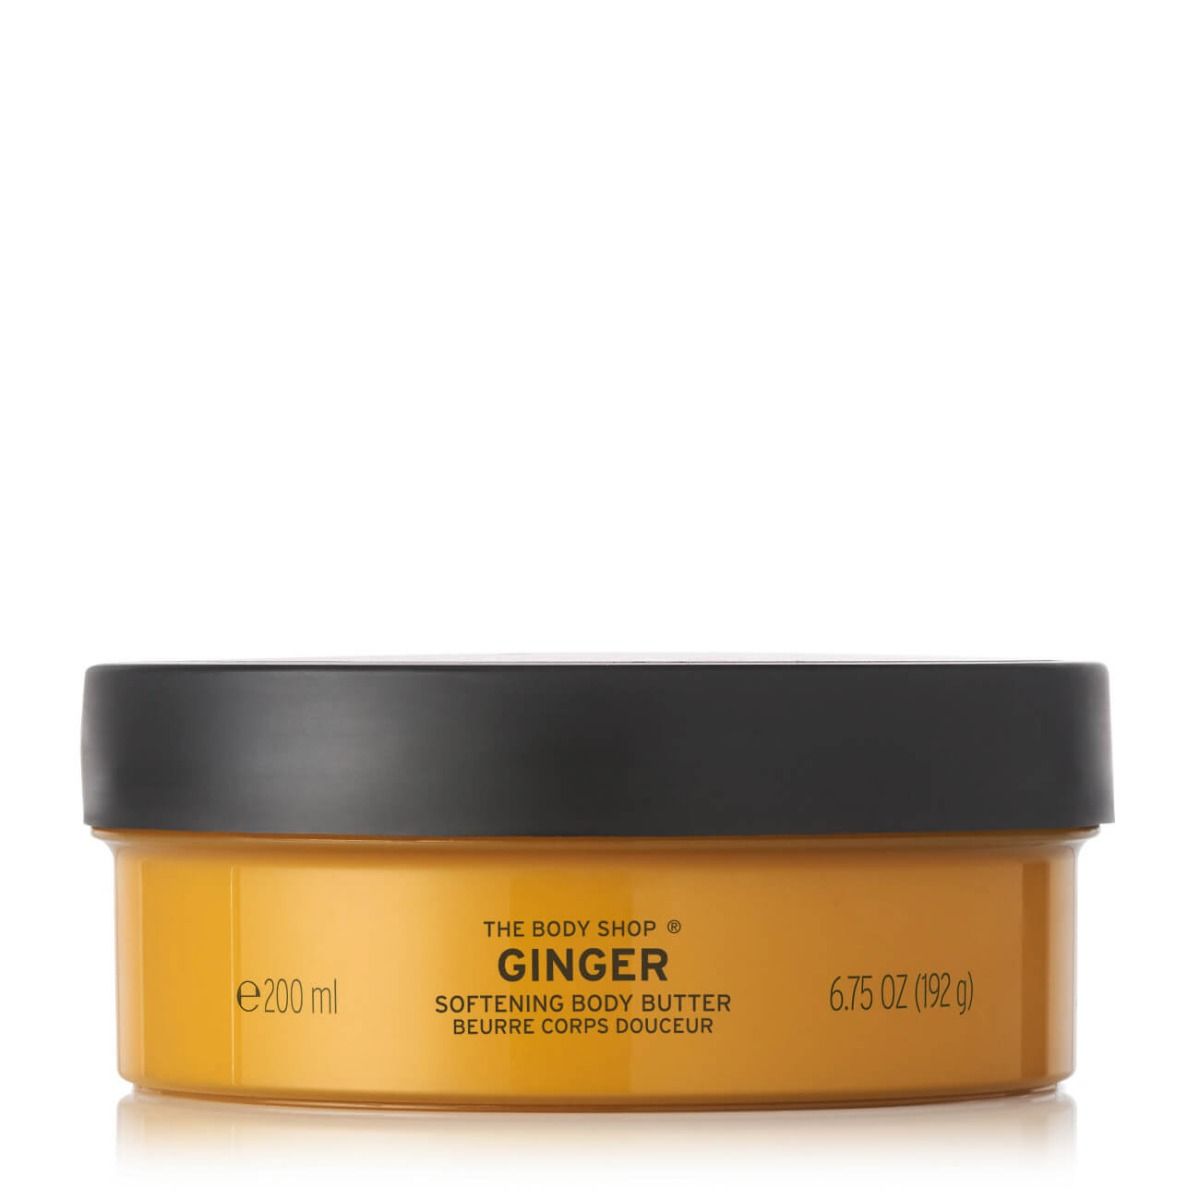 The Body Shop Ginger Softening Body Butter (200 ml) The Body Shop